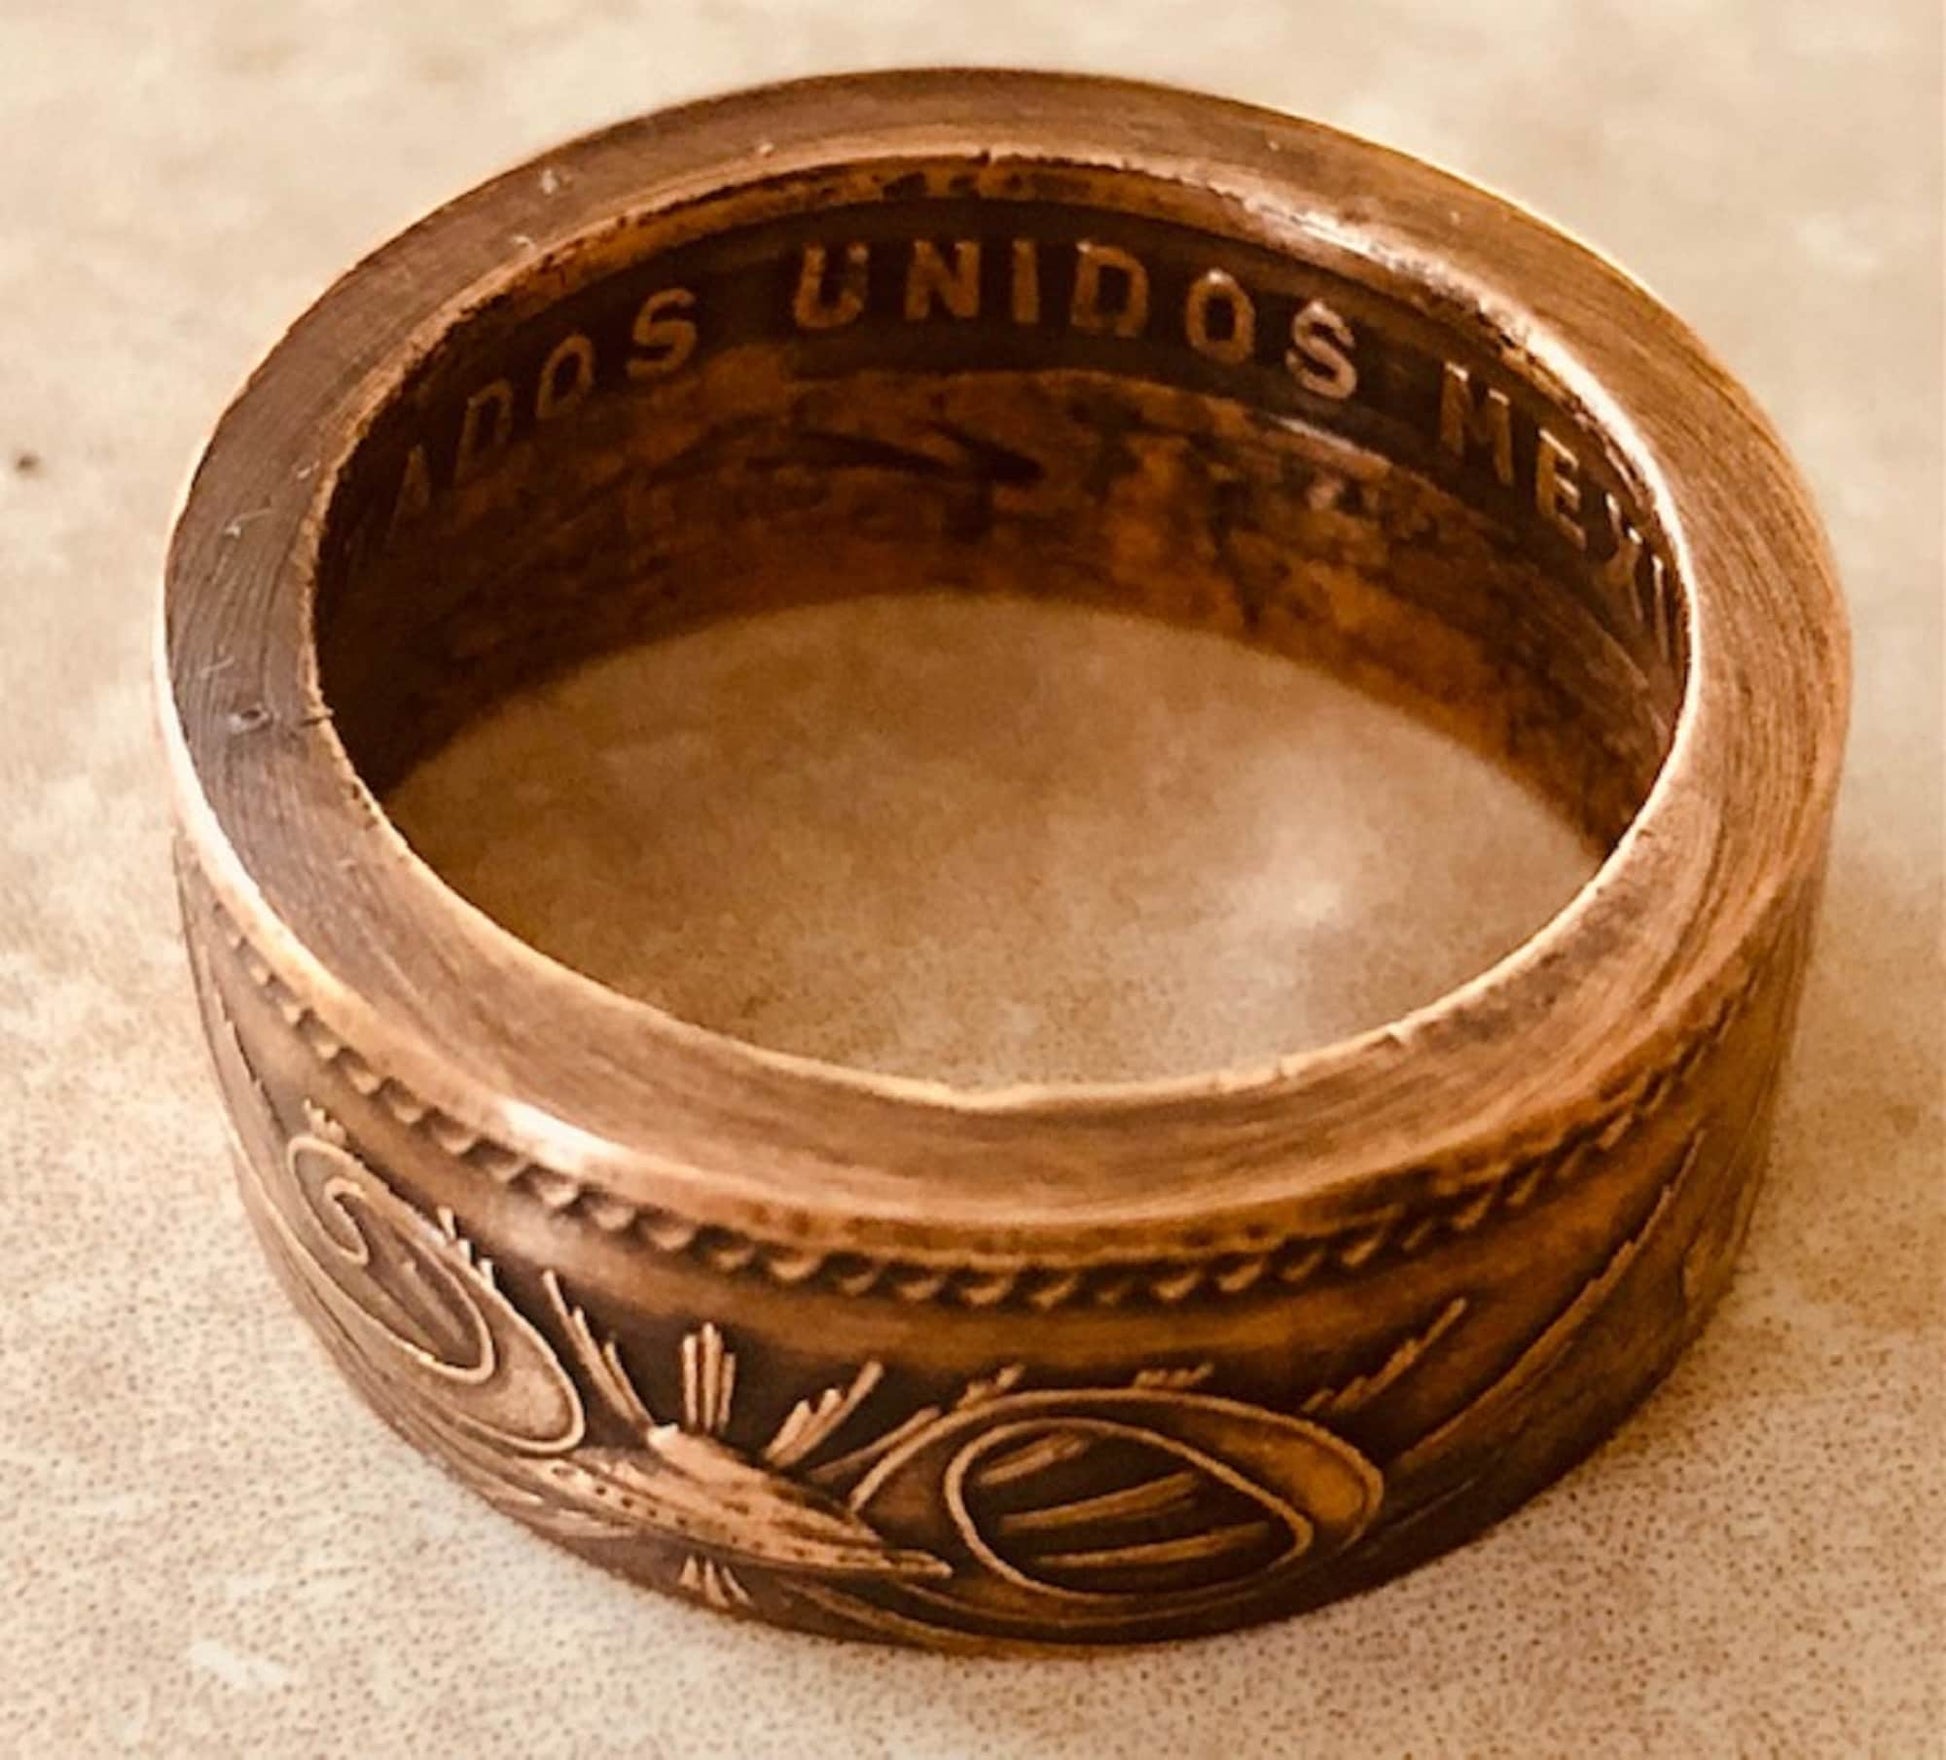 Mexico Ring 20 Centavos Mexican Ring Vintage Handmade Jewelry Gift Charm For Friend Coin Ring Gift For Him Her World Coin Collector